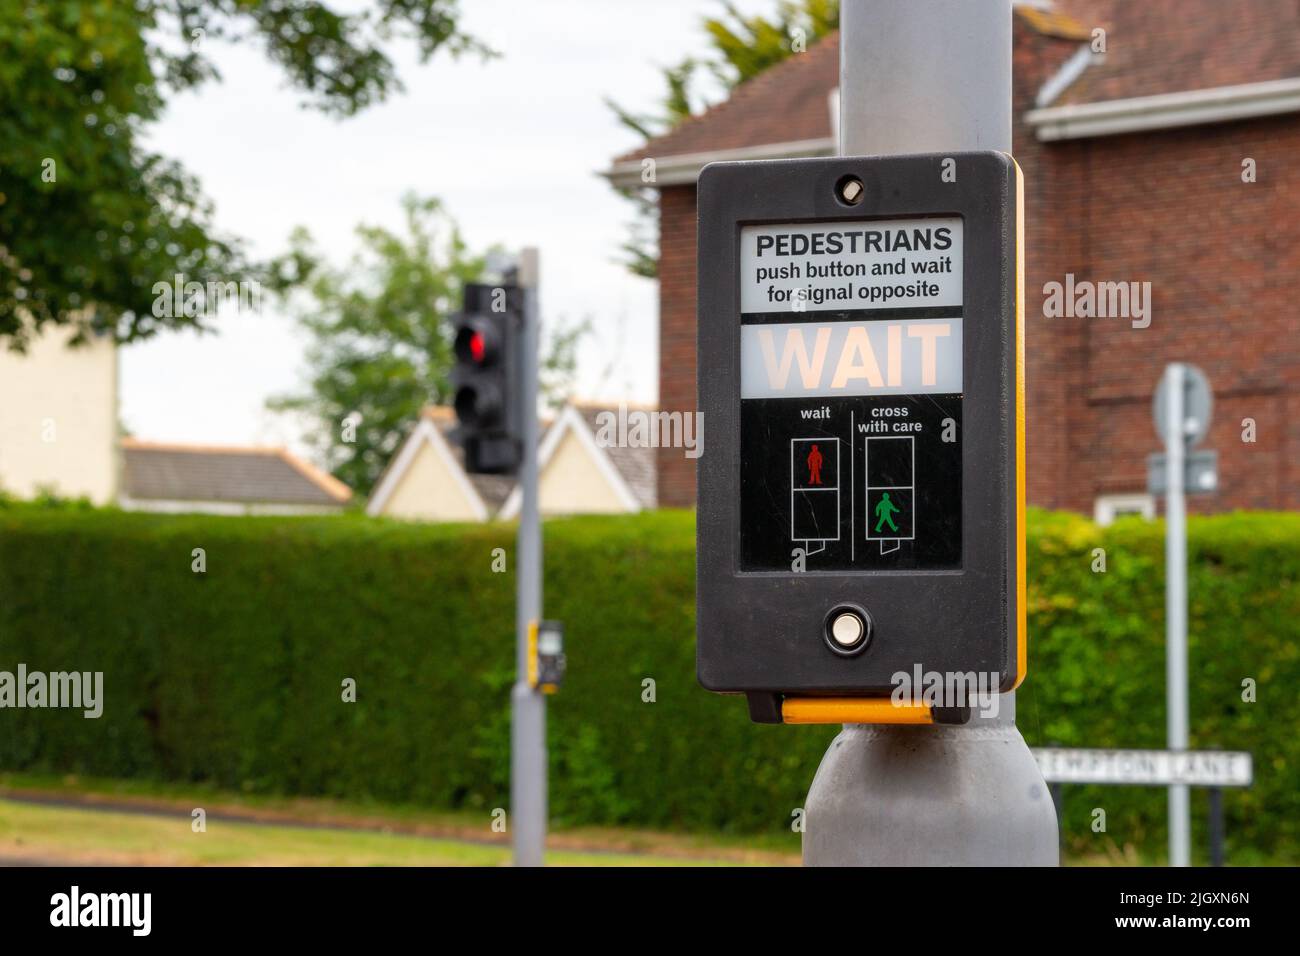 Pelican (historically Pelicon) crossing on a UK road. Pedestrians push button and wait for signal opposite Stock Photo